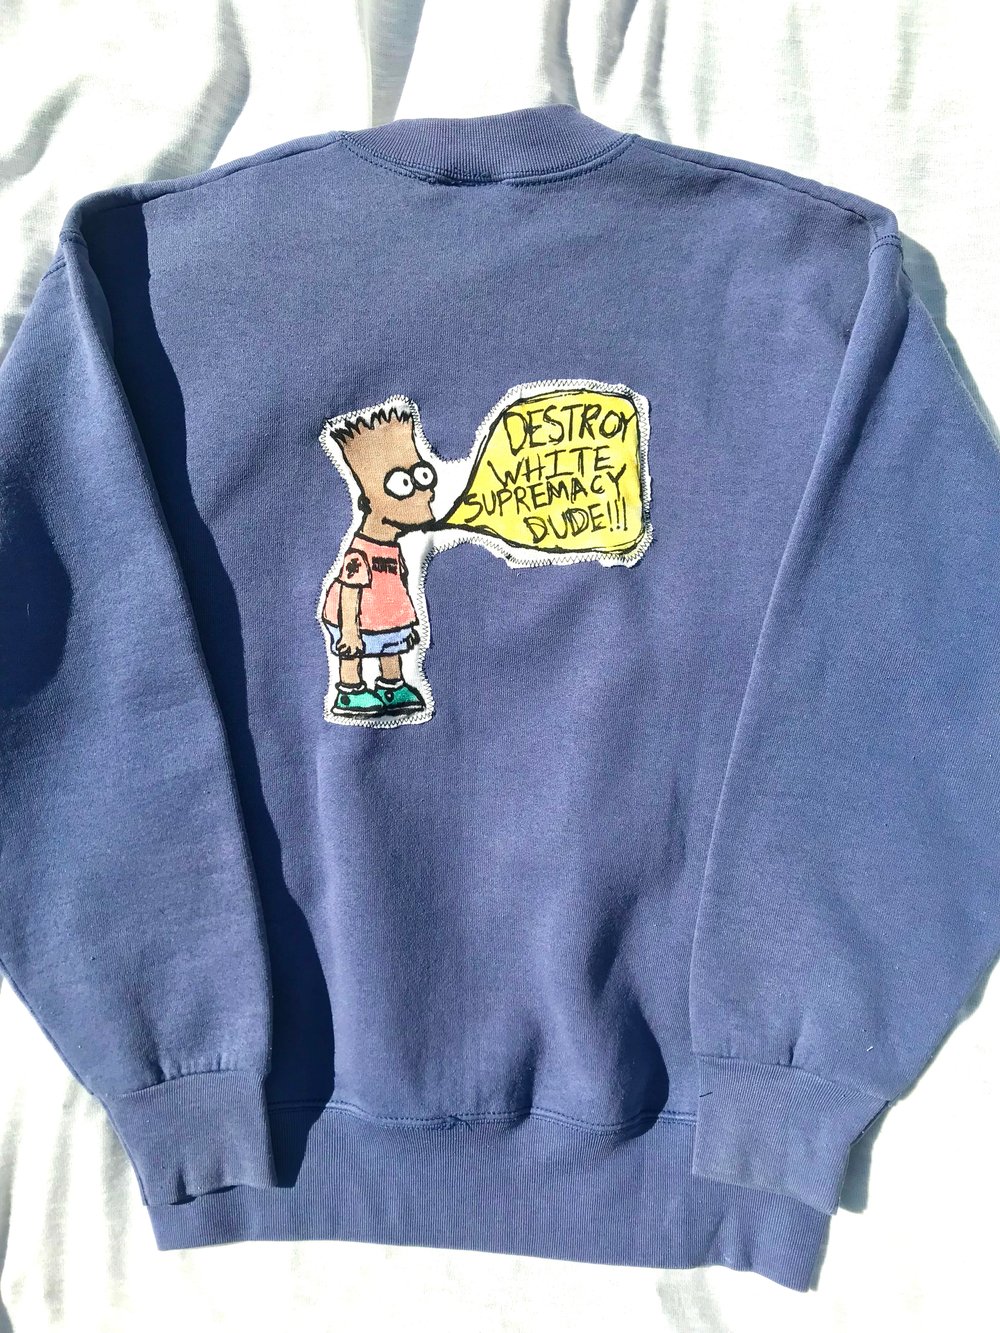 DWS dude hand painted sweater in blue 